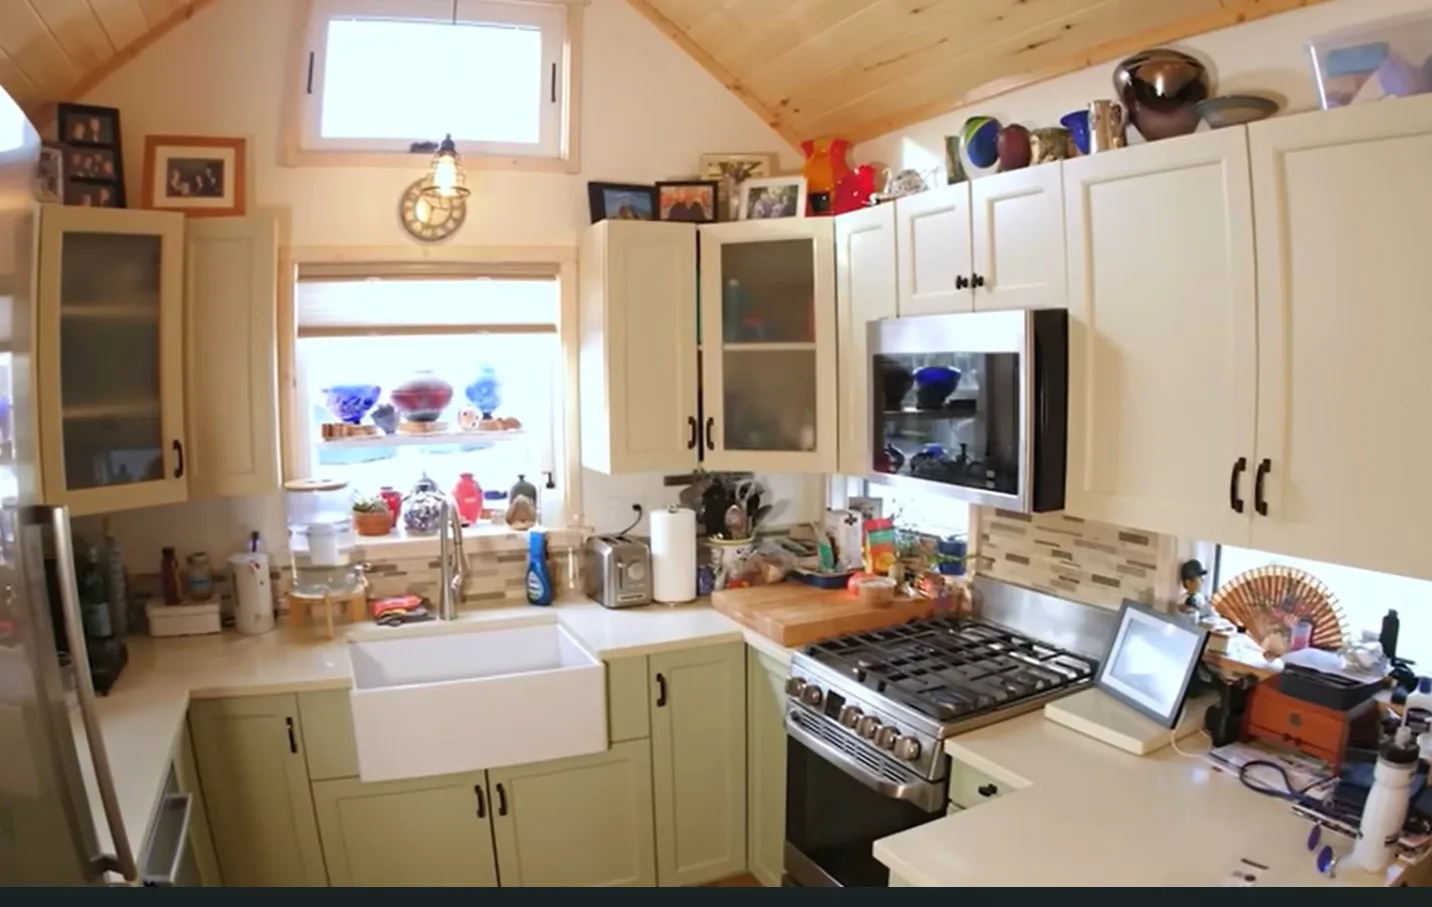 The kitchen folds a full-sized refrigerator, stove and oven, microwave, and dishwasher.